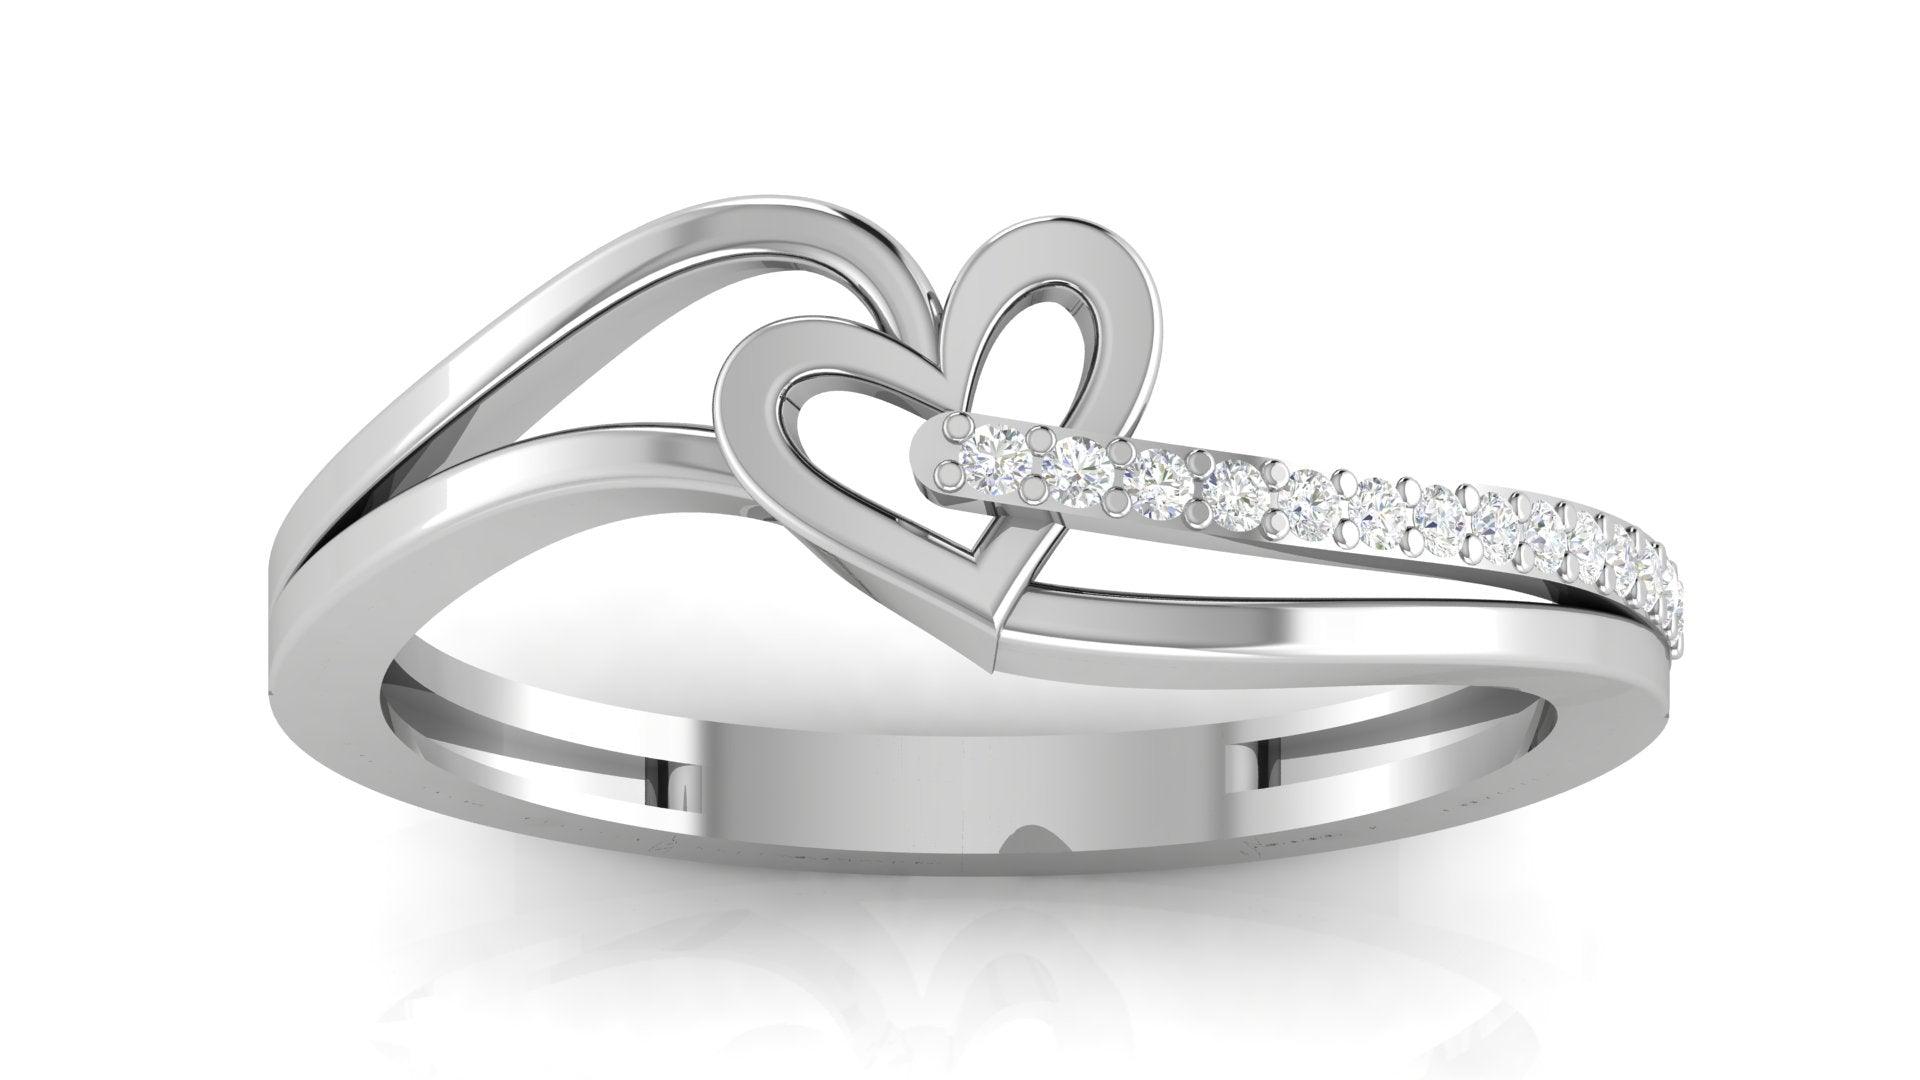 Auory 925 Sterling Silver Heart Ring AUPR-210 - Auory